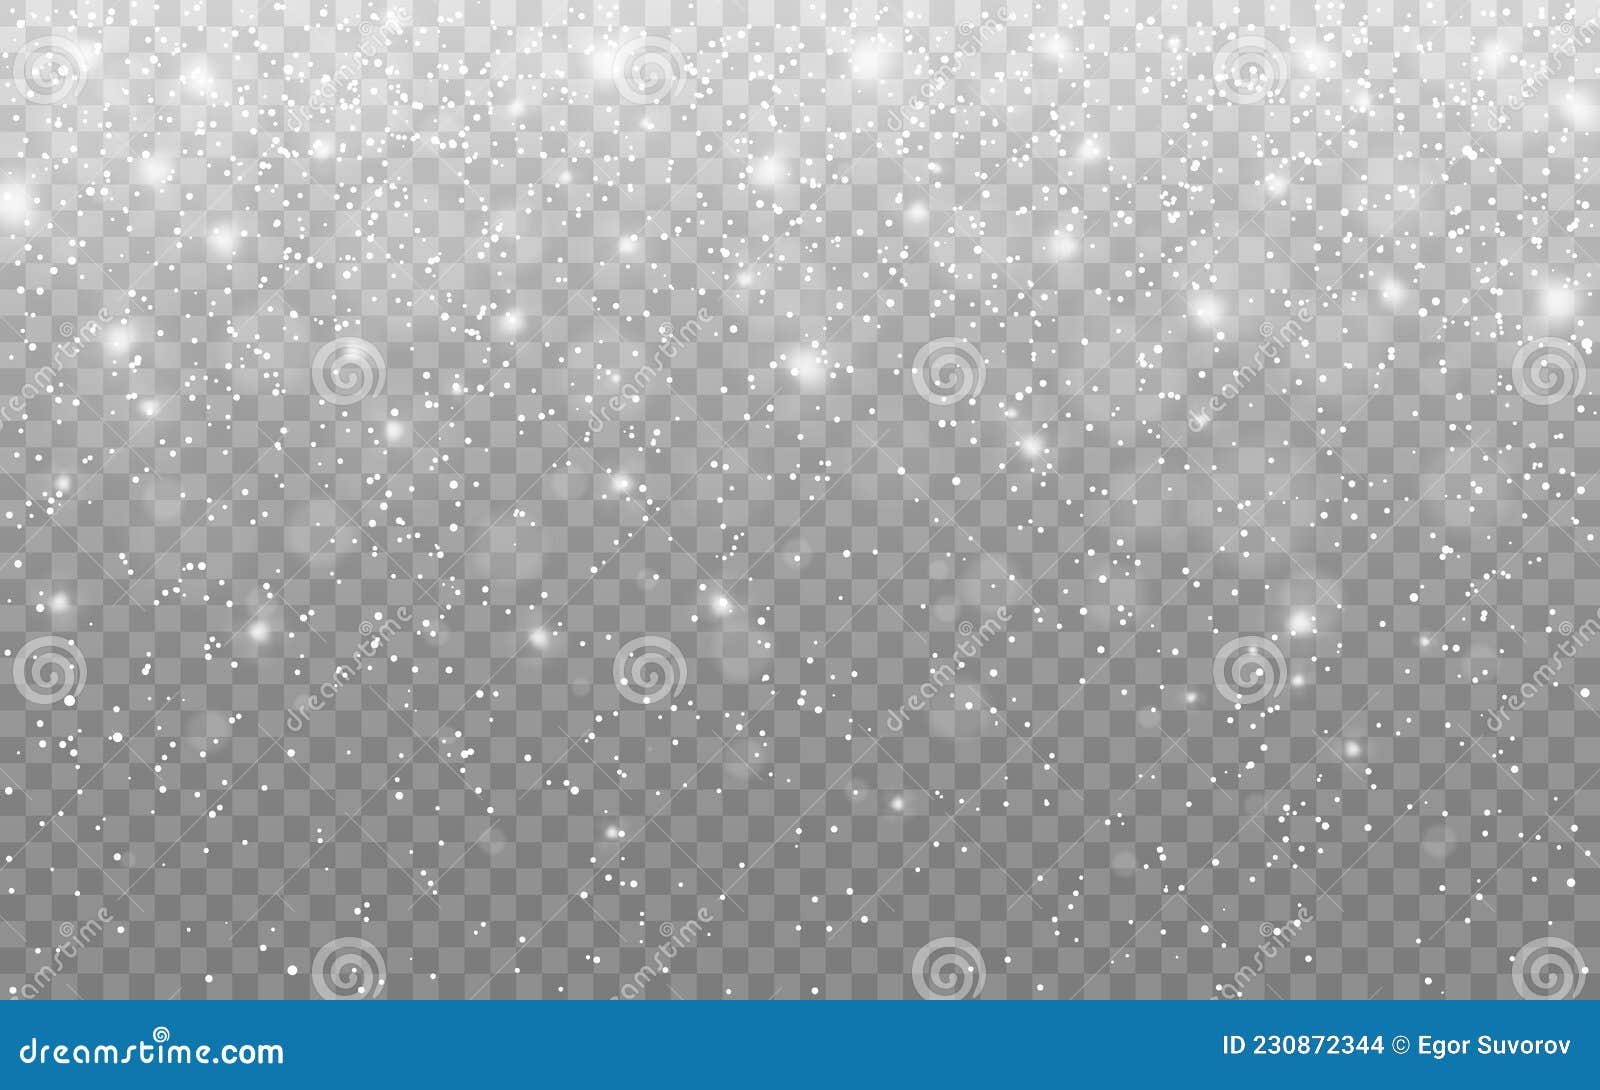 Snow Flakes Hd Transparent, White Snow Flakes Over Blue Gradient, Blue,  Blur, Blurred Snowflakes PNG Image For Free Download